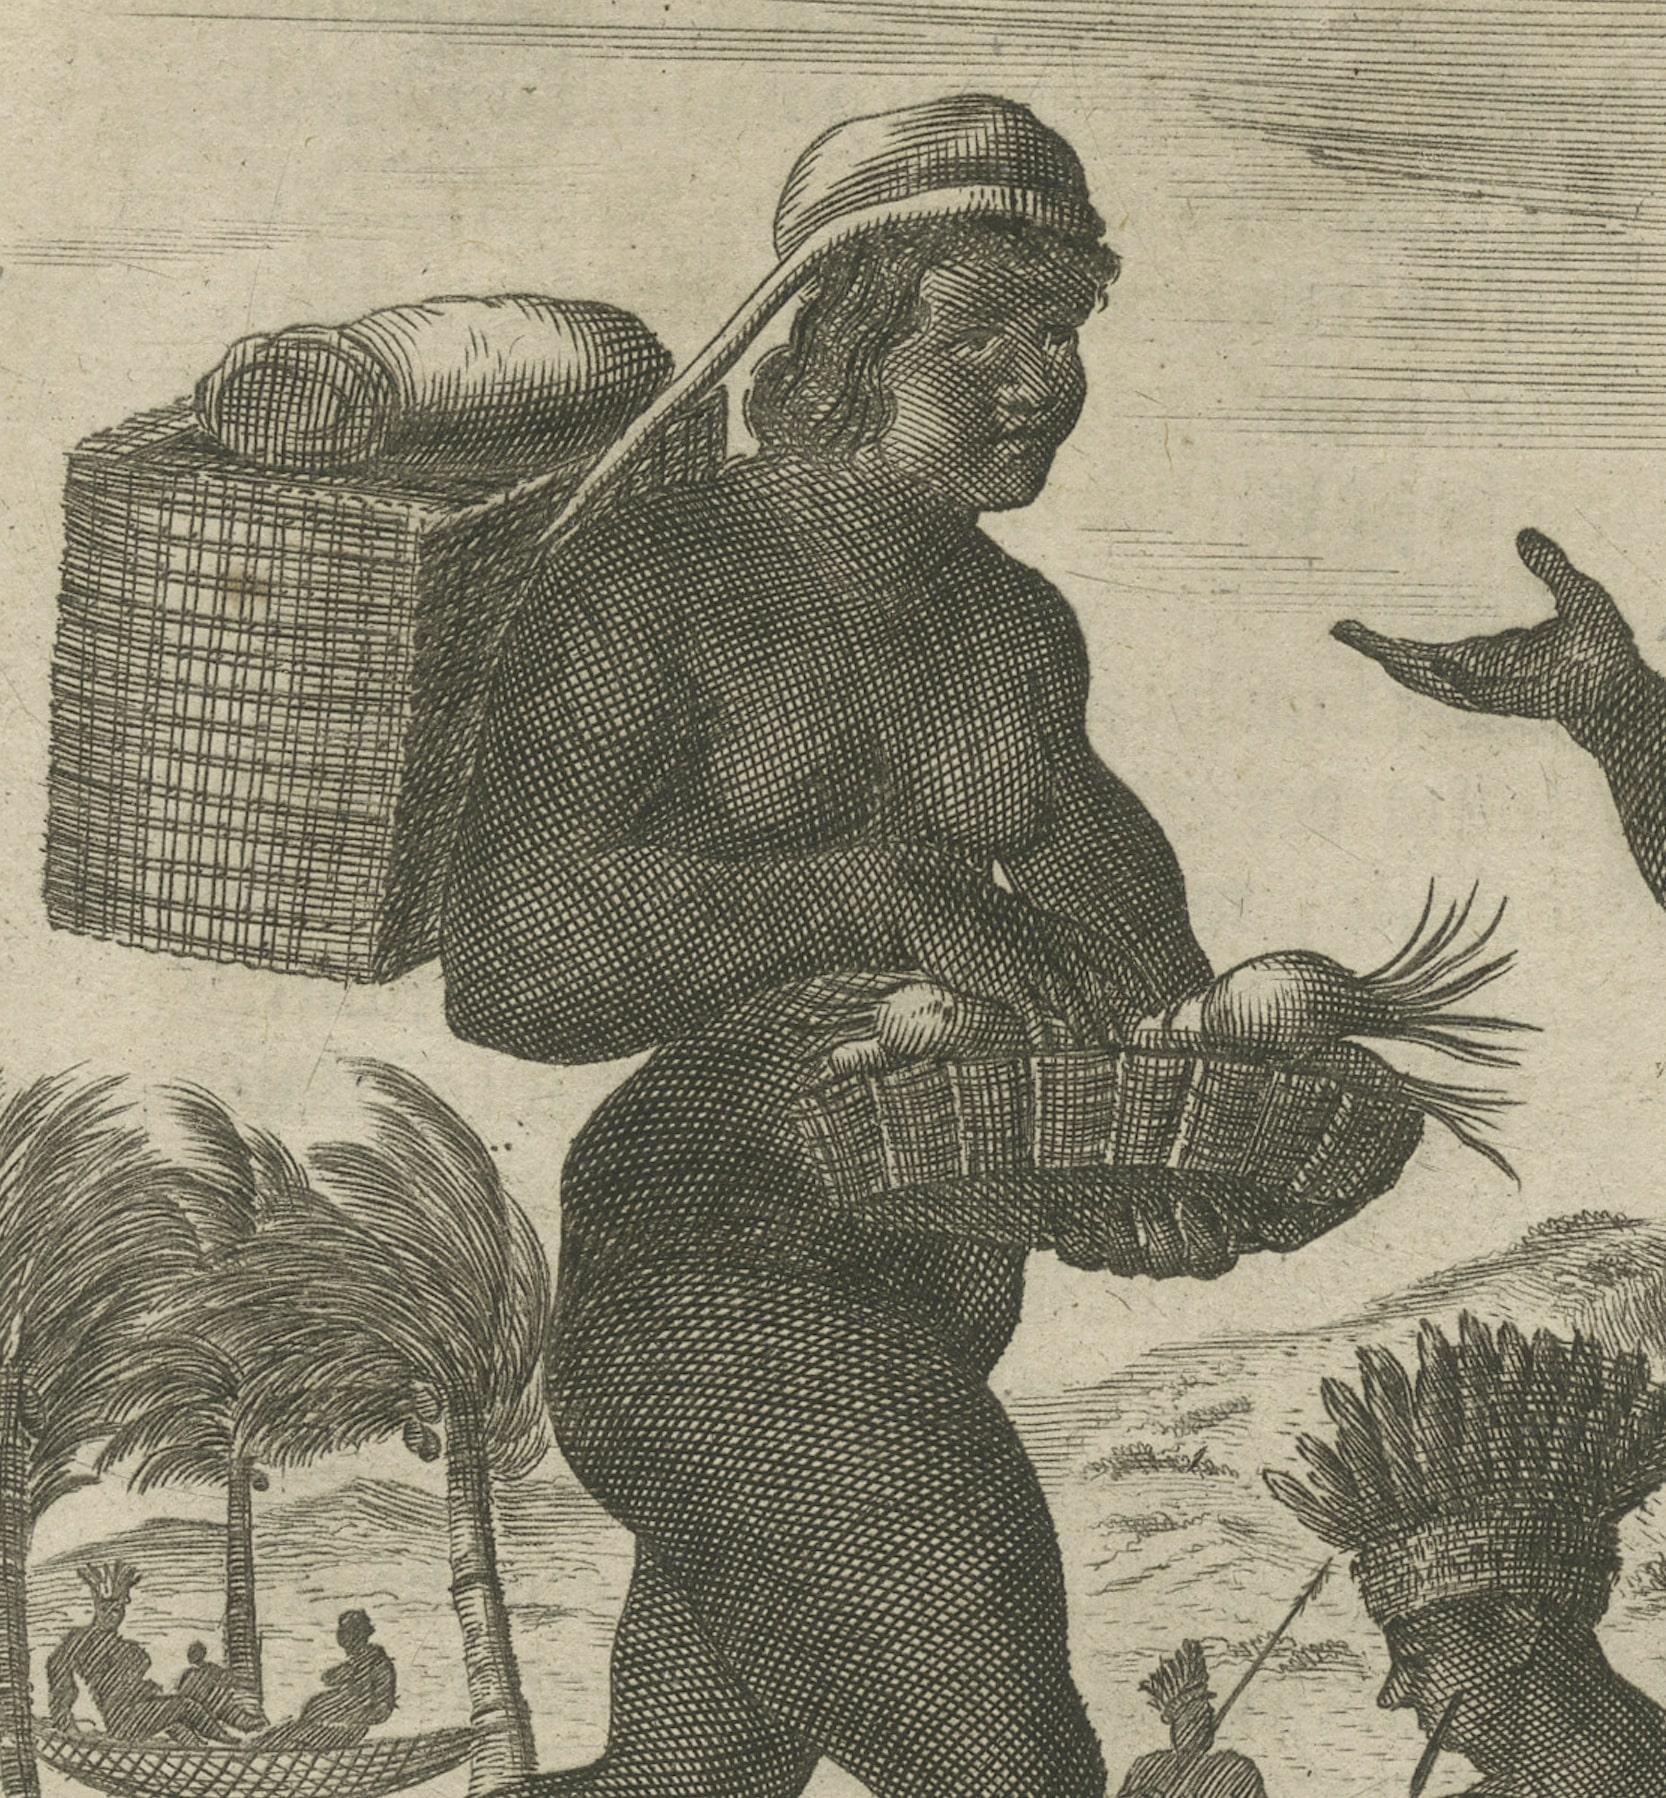 Engraved Daily Life in Brazil in the early 17th Century on a Copper Engraving by Montanus For Sale